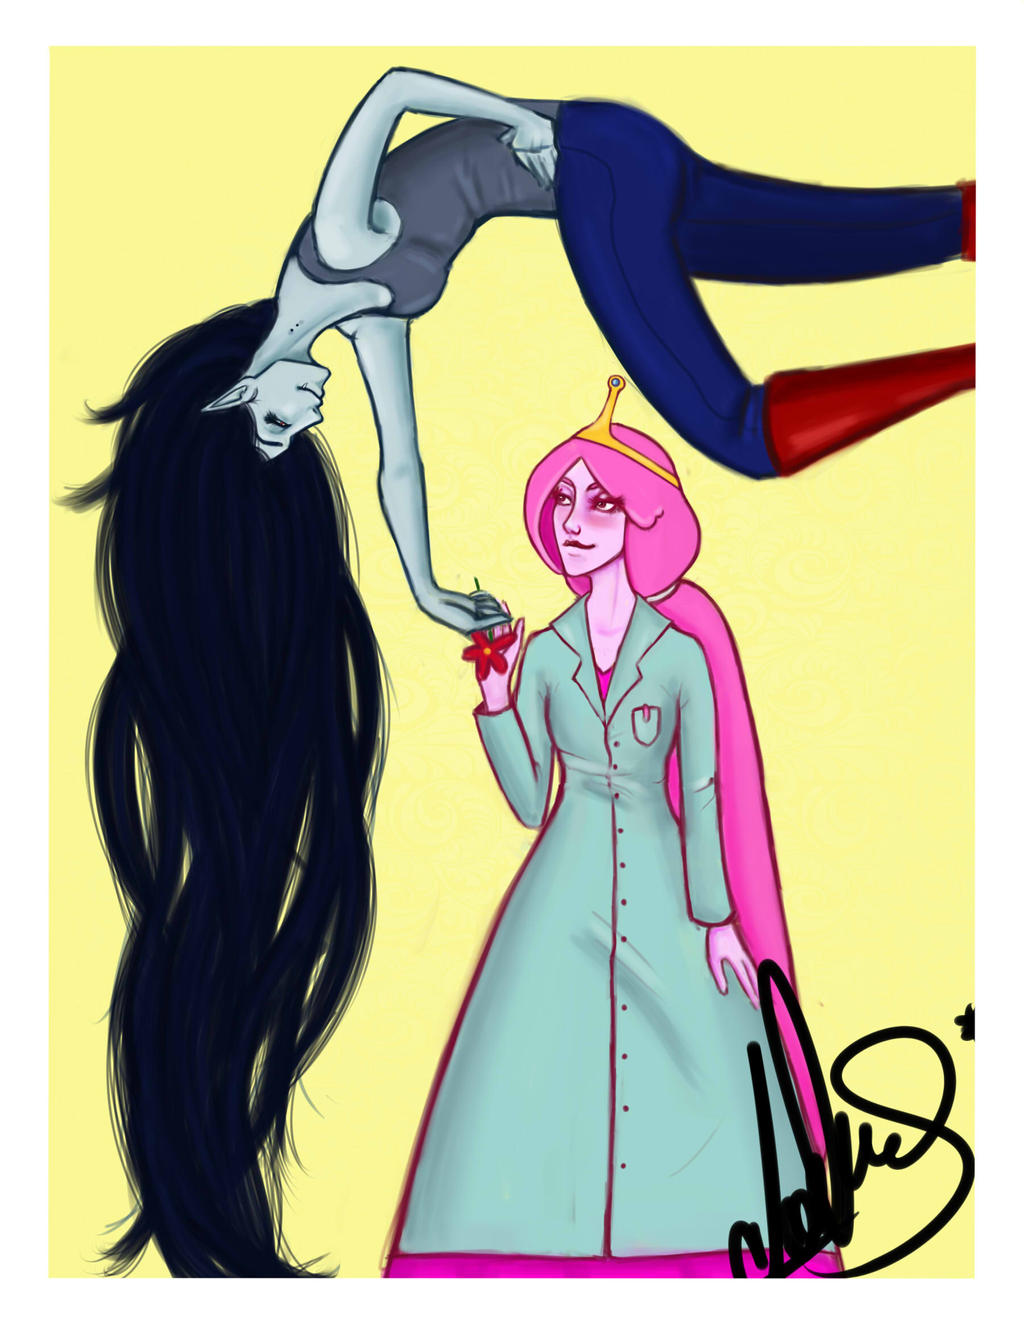 PB and Marceline by NaesCadence on DeviantArt